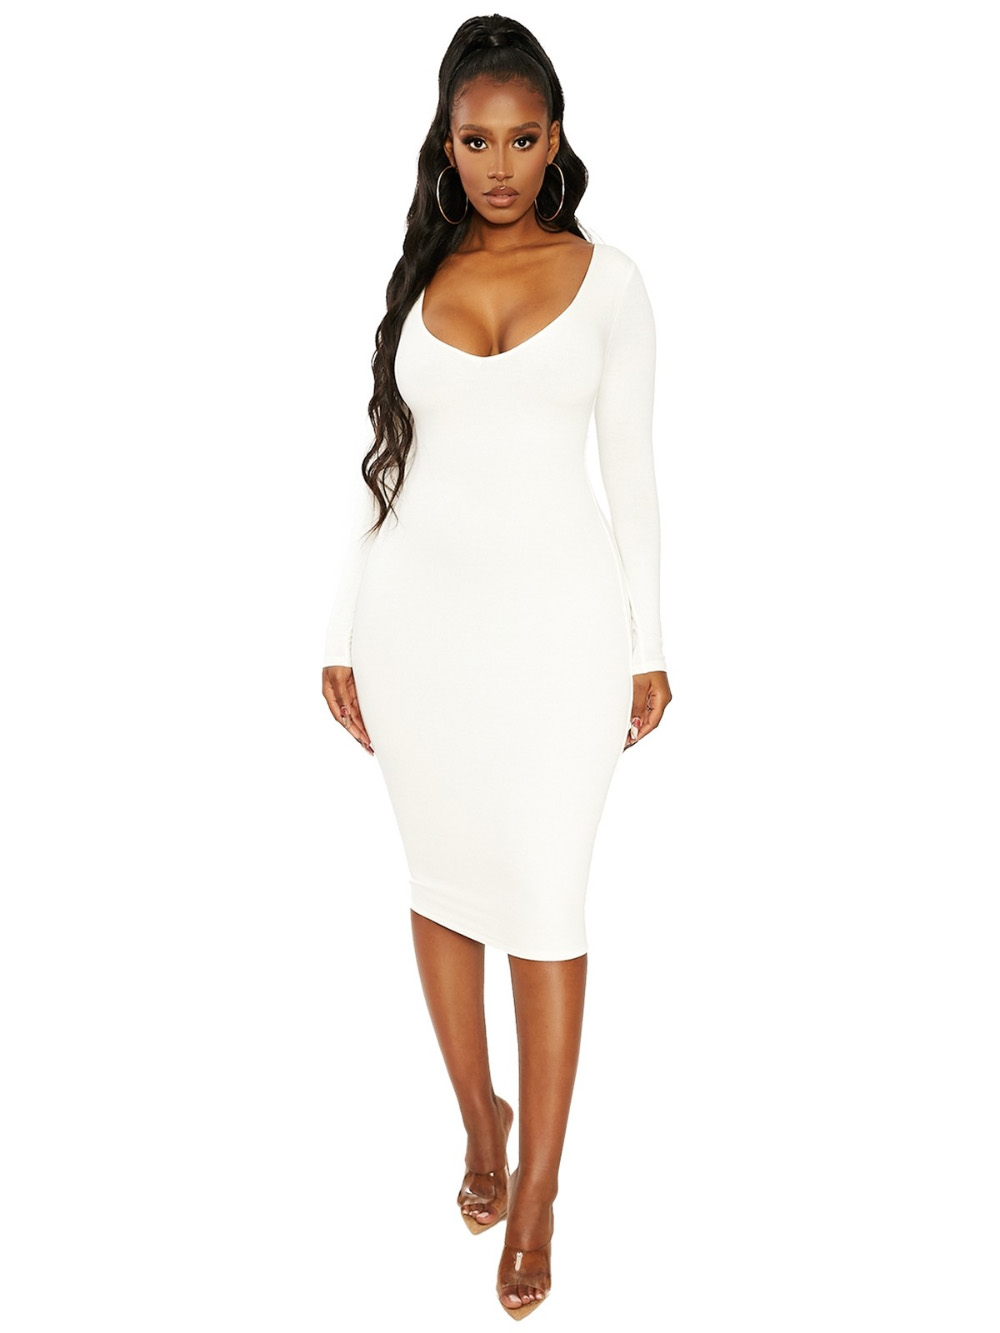 https://flyfiercefab.com/wp-content/uploads/2020/12/The-NW-In-Too-Deep-V-Dress.jpg